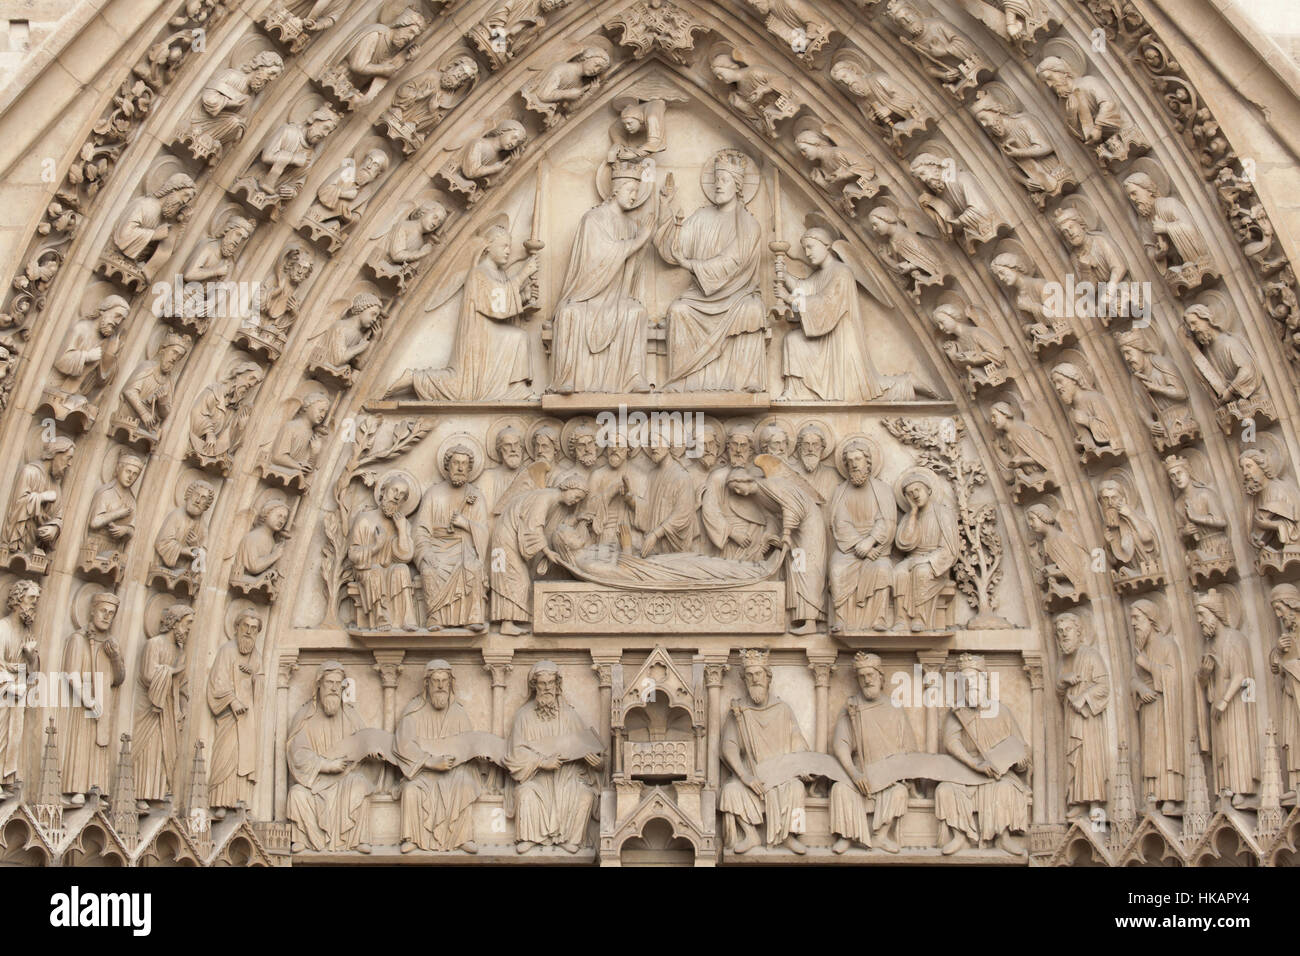 Coronation of the Virgin Mary, Dormition of the Virgin Mary and Three Prophets and Three Kings sitting beside the Ark of the Covenant (from top to bottom). Neo-Gothic tympanum of the portal of the Virgin Mary on the main facade of the Notre-Dame Cathedral (Notre-Dame de Paris) in Paris, France. The damaged Gothic portal was restored by French architects Eugene Viollet-le-Duc and Jean-Baptiste Lassus in the 1840s. Stock Photo